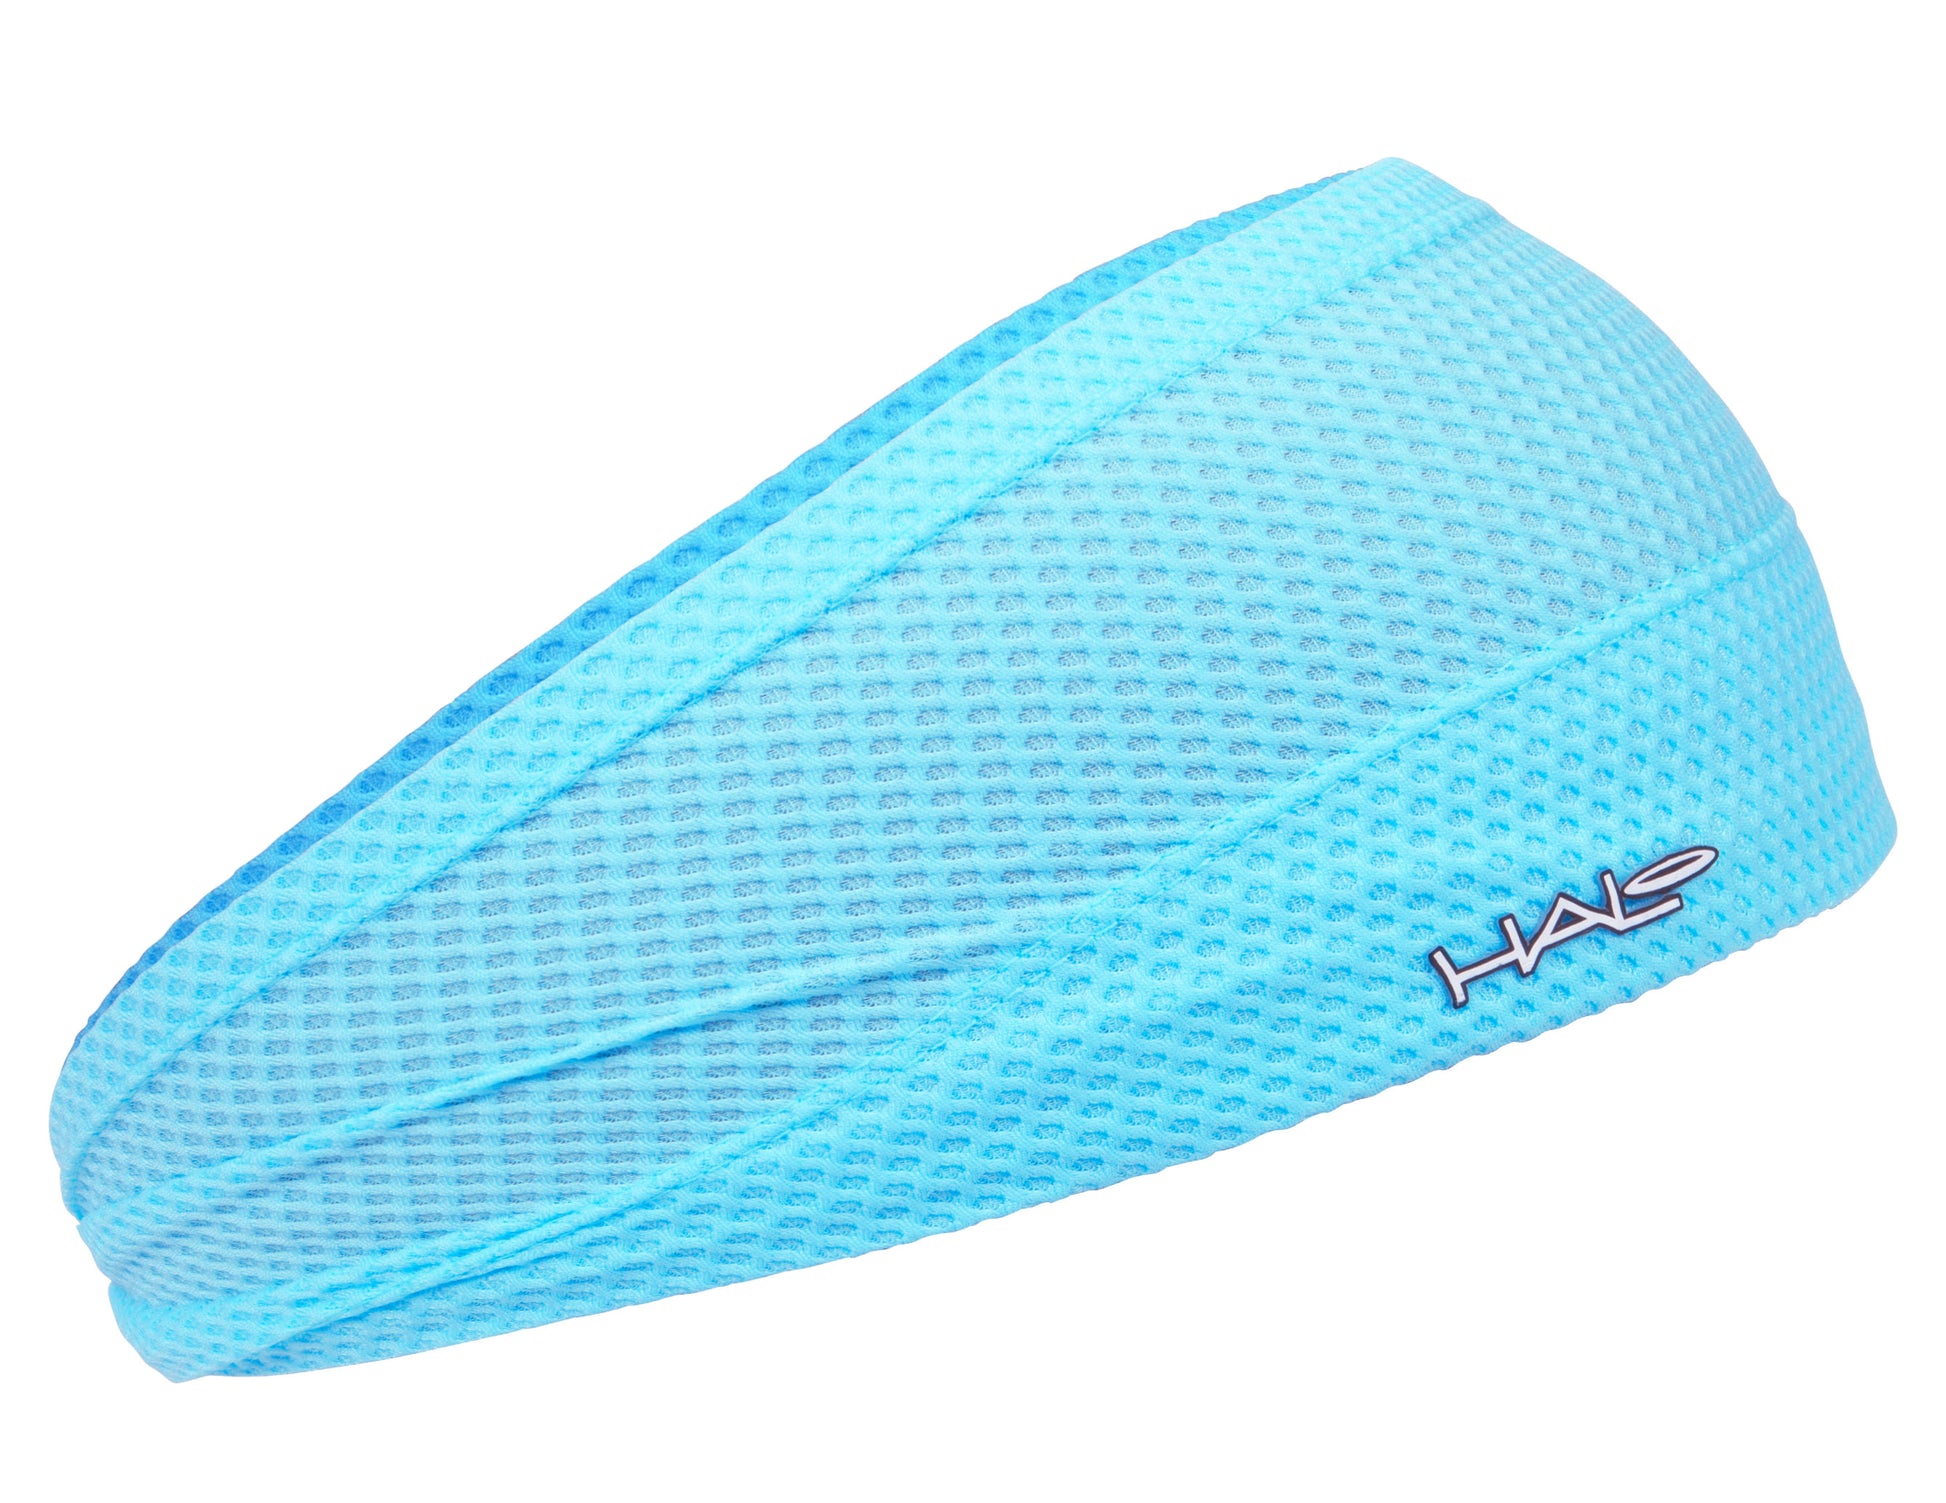 Halo Bandit Pullover head band, side view in Aqua Air.